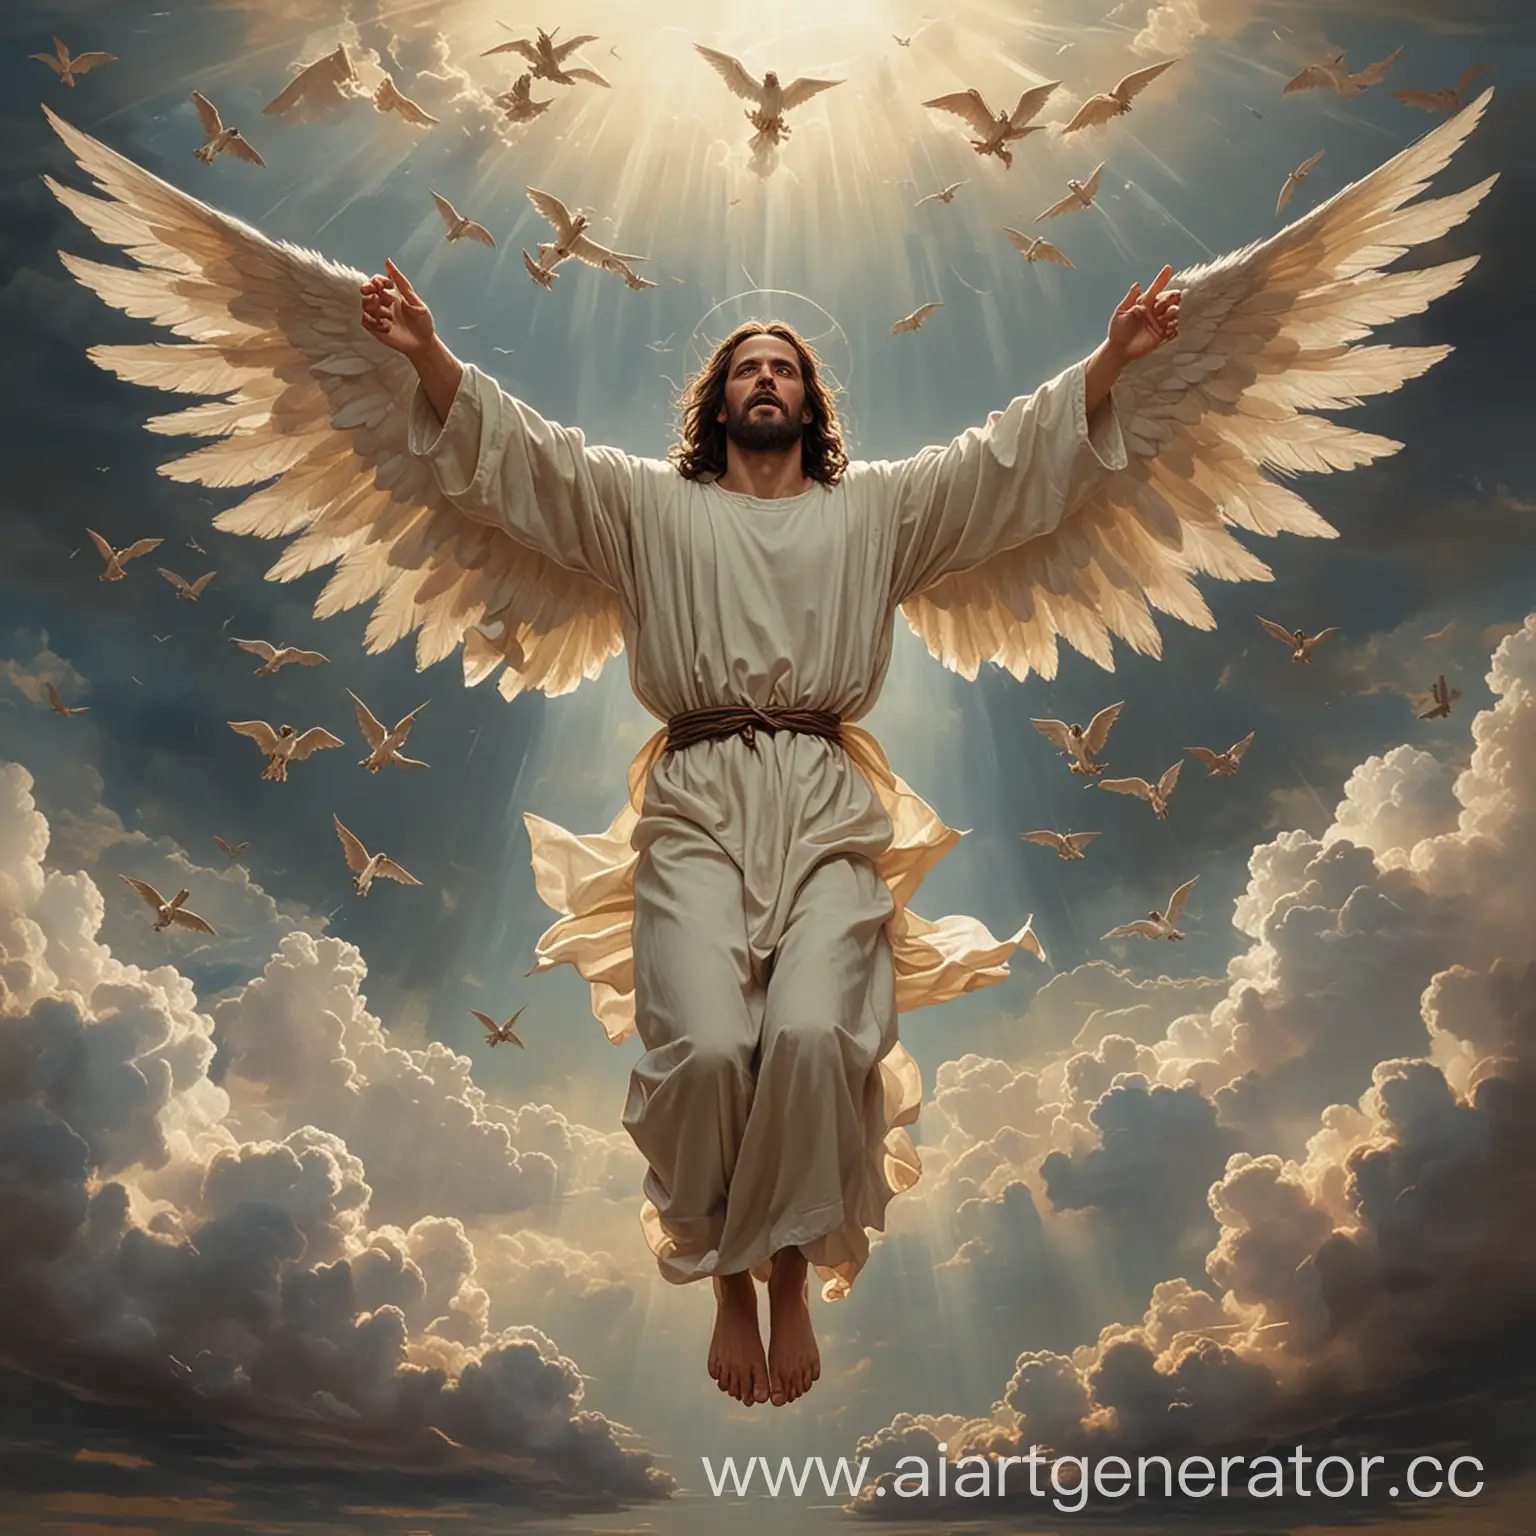 Jesus-Ascending-with-Winged-Glory-over-Devils